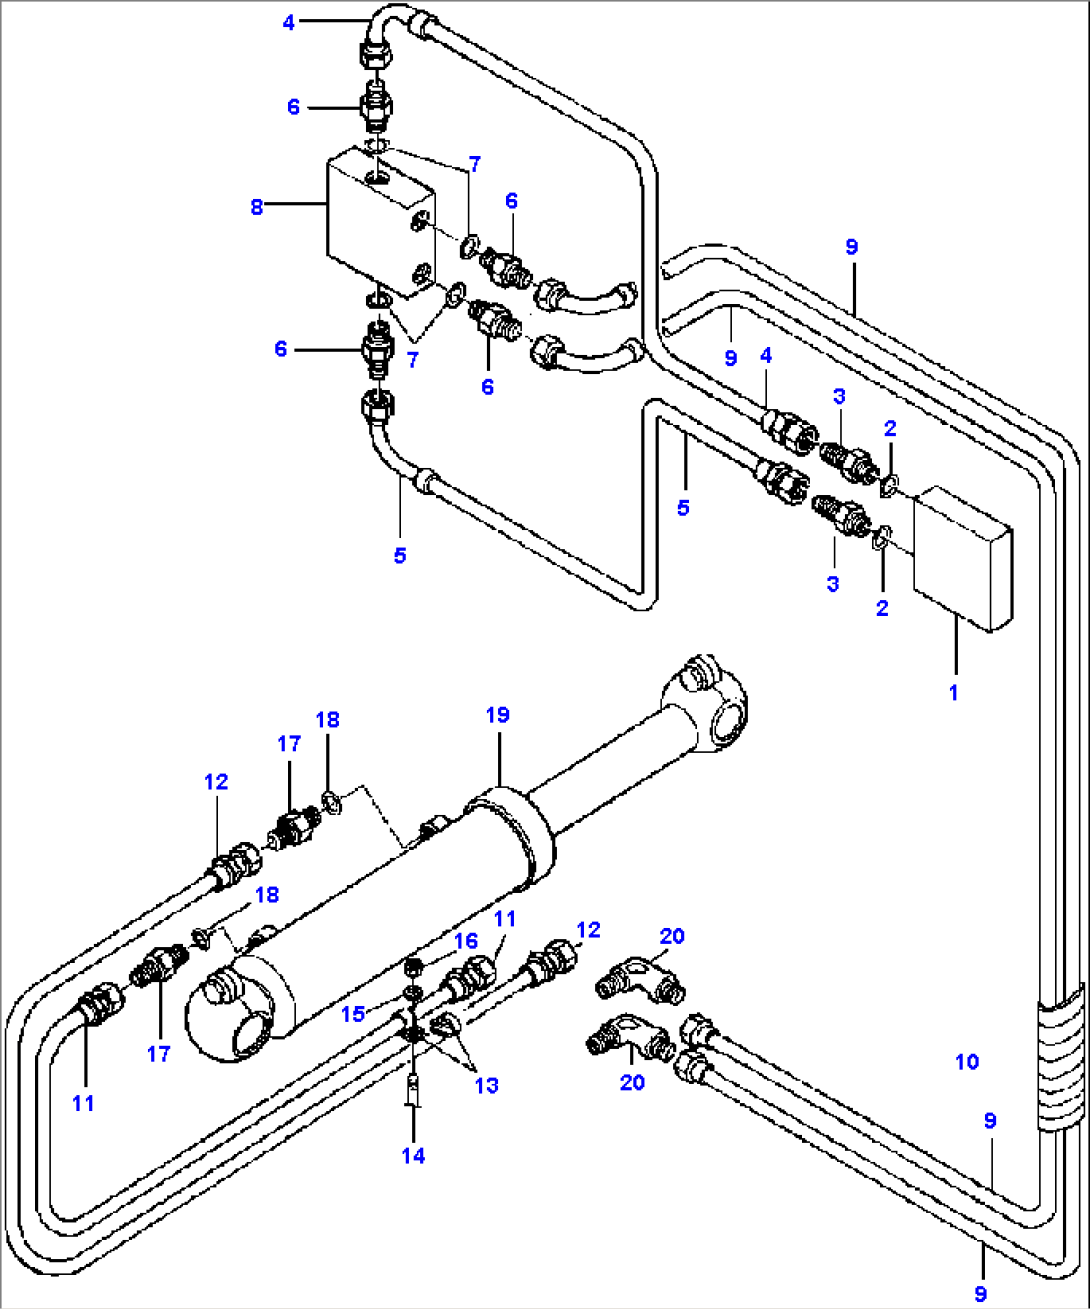 FIG. H5110-02A11 DRAWBAR SIDE SHIFT ACTUATOR LINES - R.H. AND L.H. 90° BLADE SUSPENSION